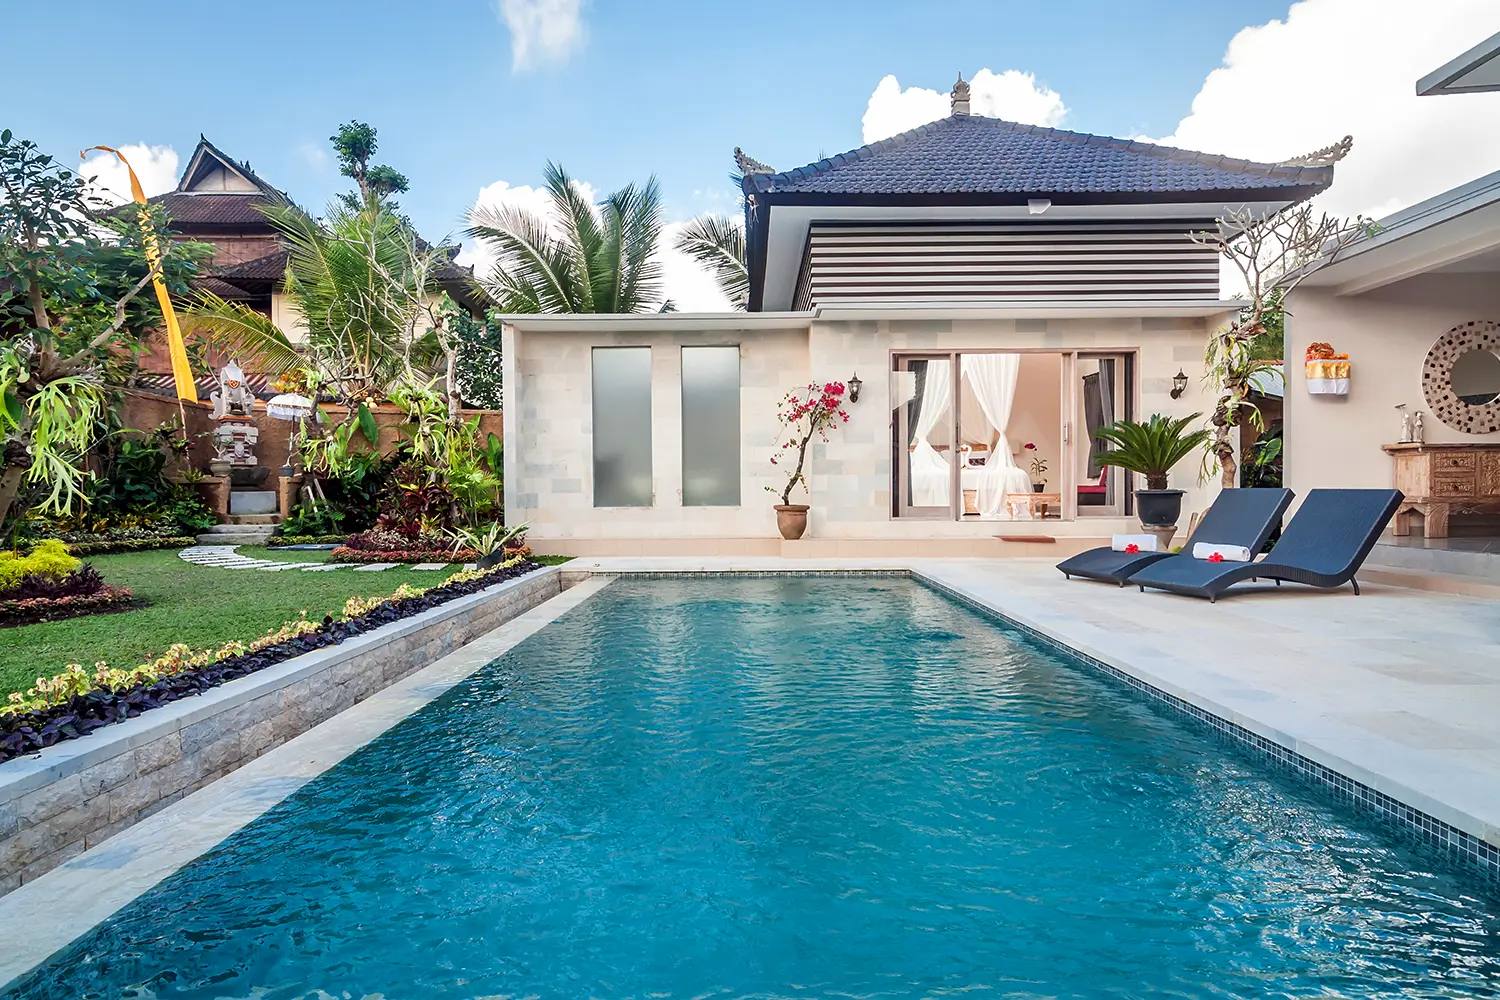 Exterior luxury villa in Bali with a garden and swimming pool outdoors.